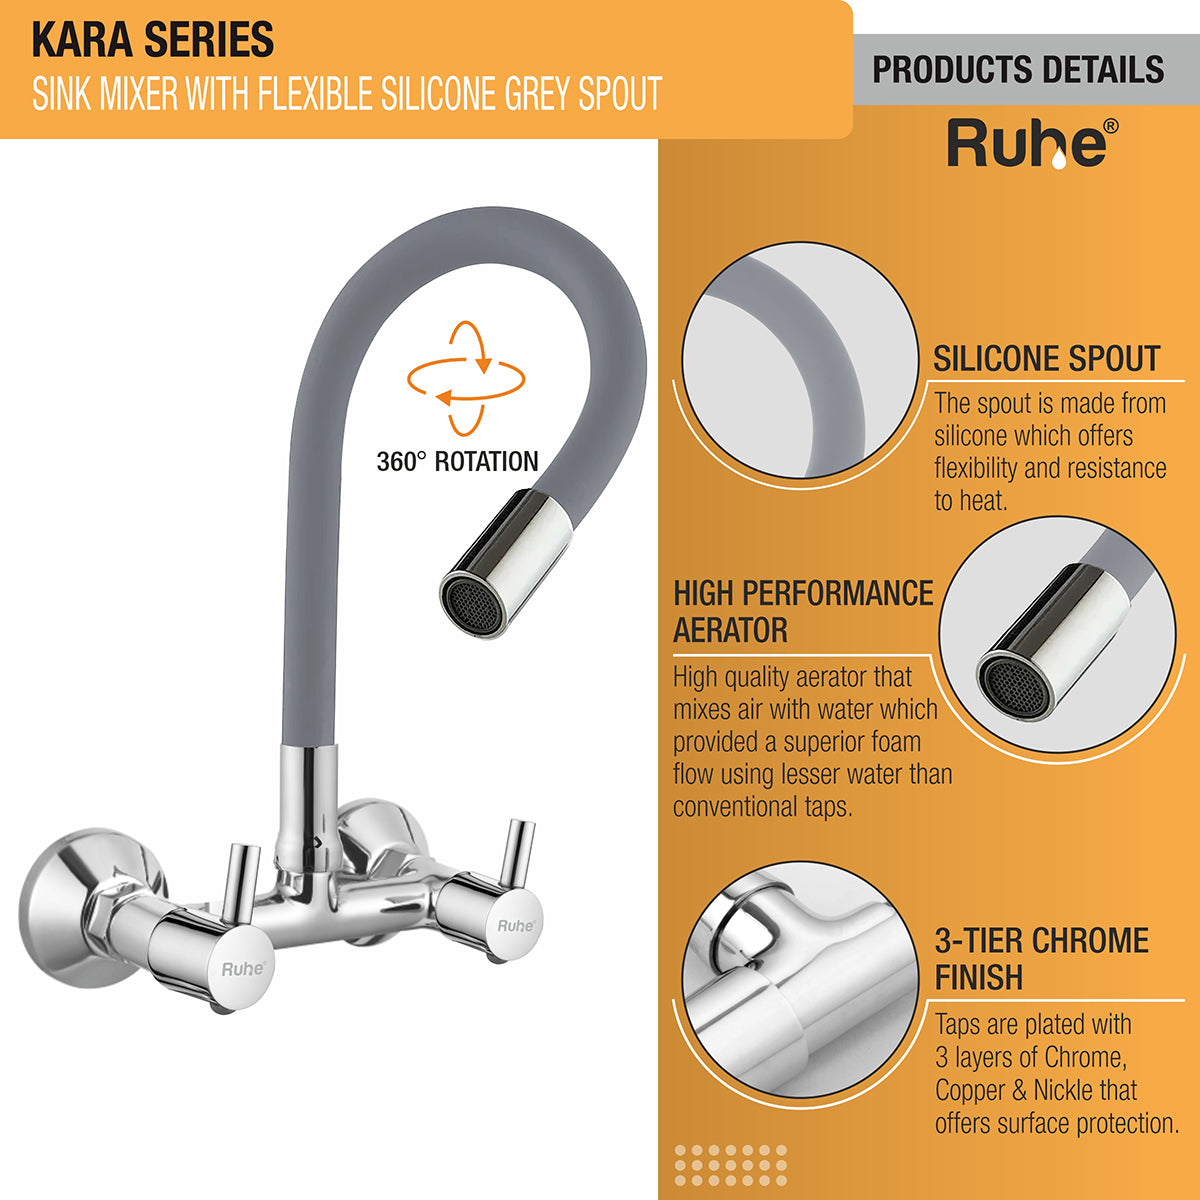 Kara Sink Mixer Brass Faucet with Silicone Grey Flexible Spout product details